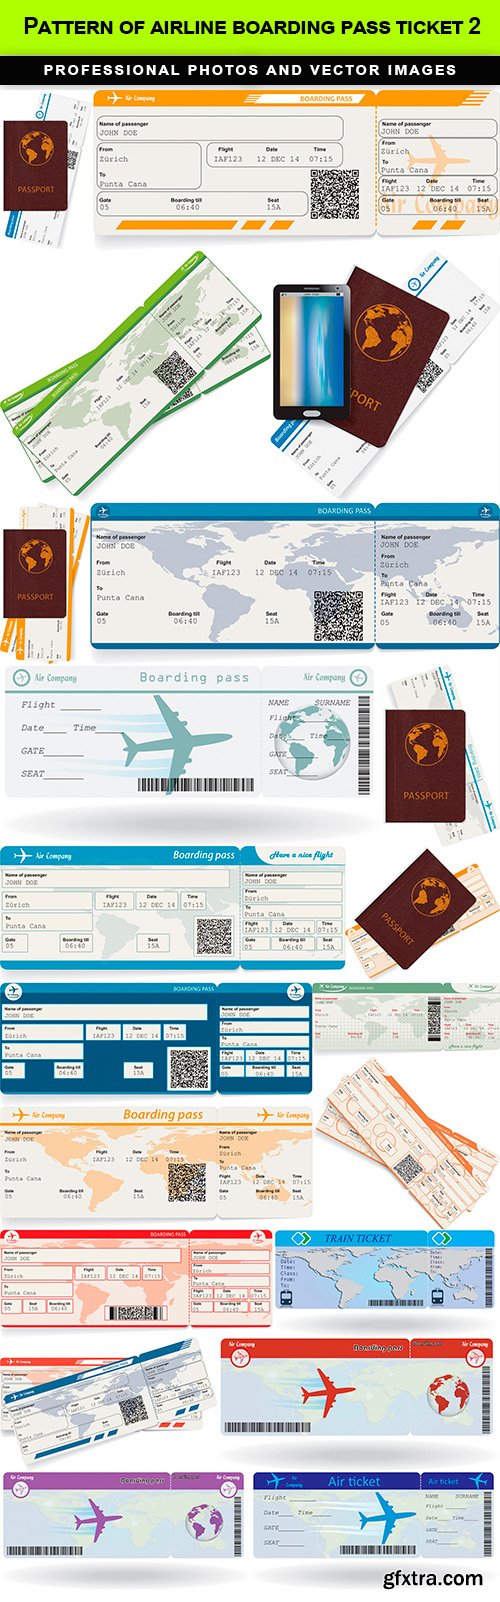 Pattern of airline boarding pass ticket 2